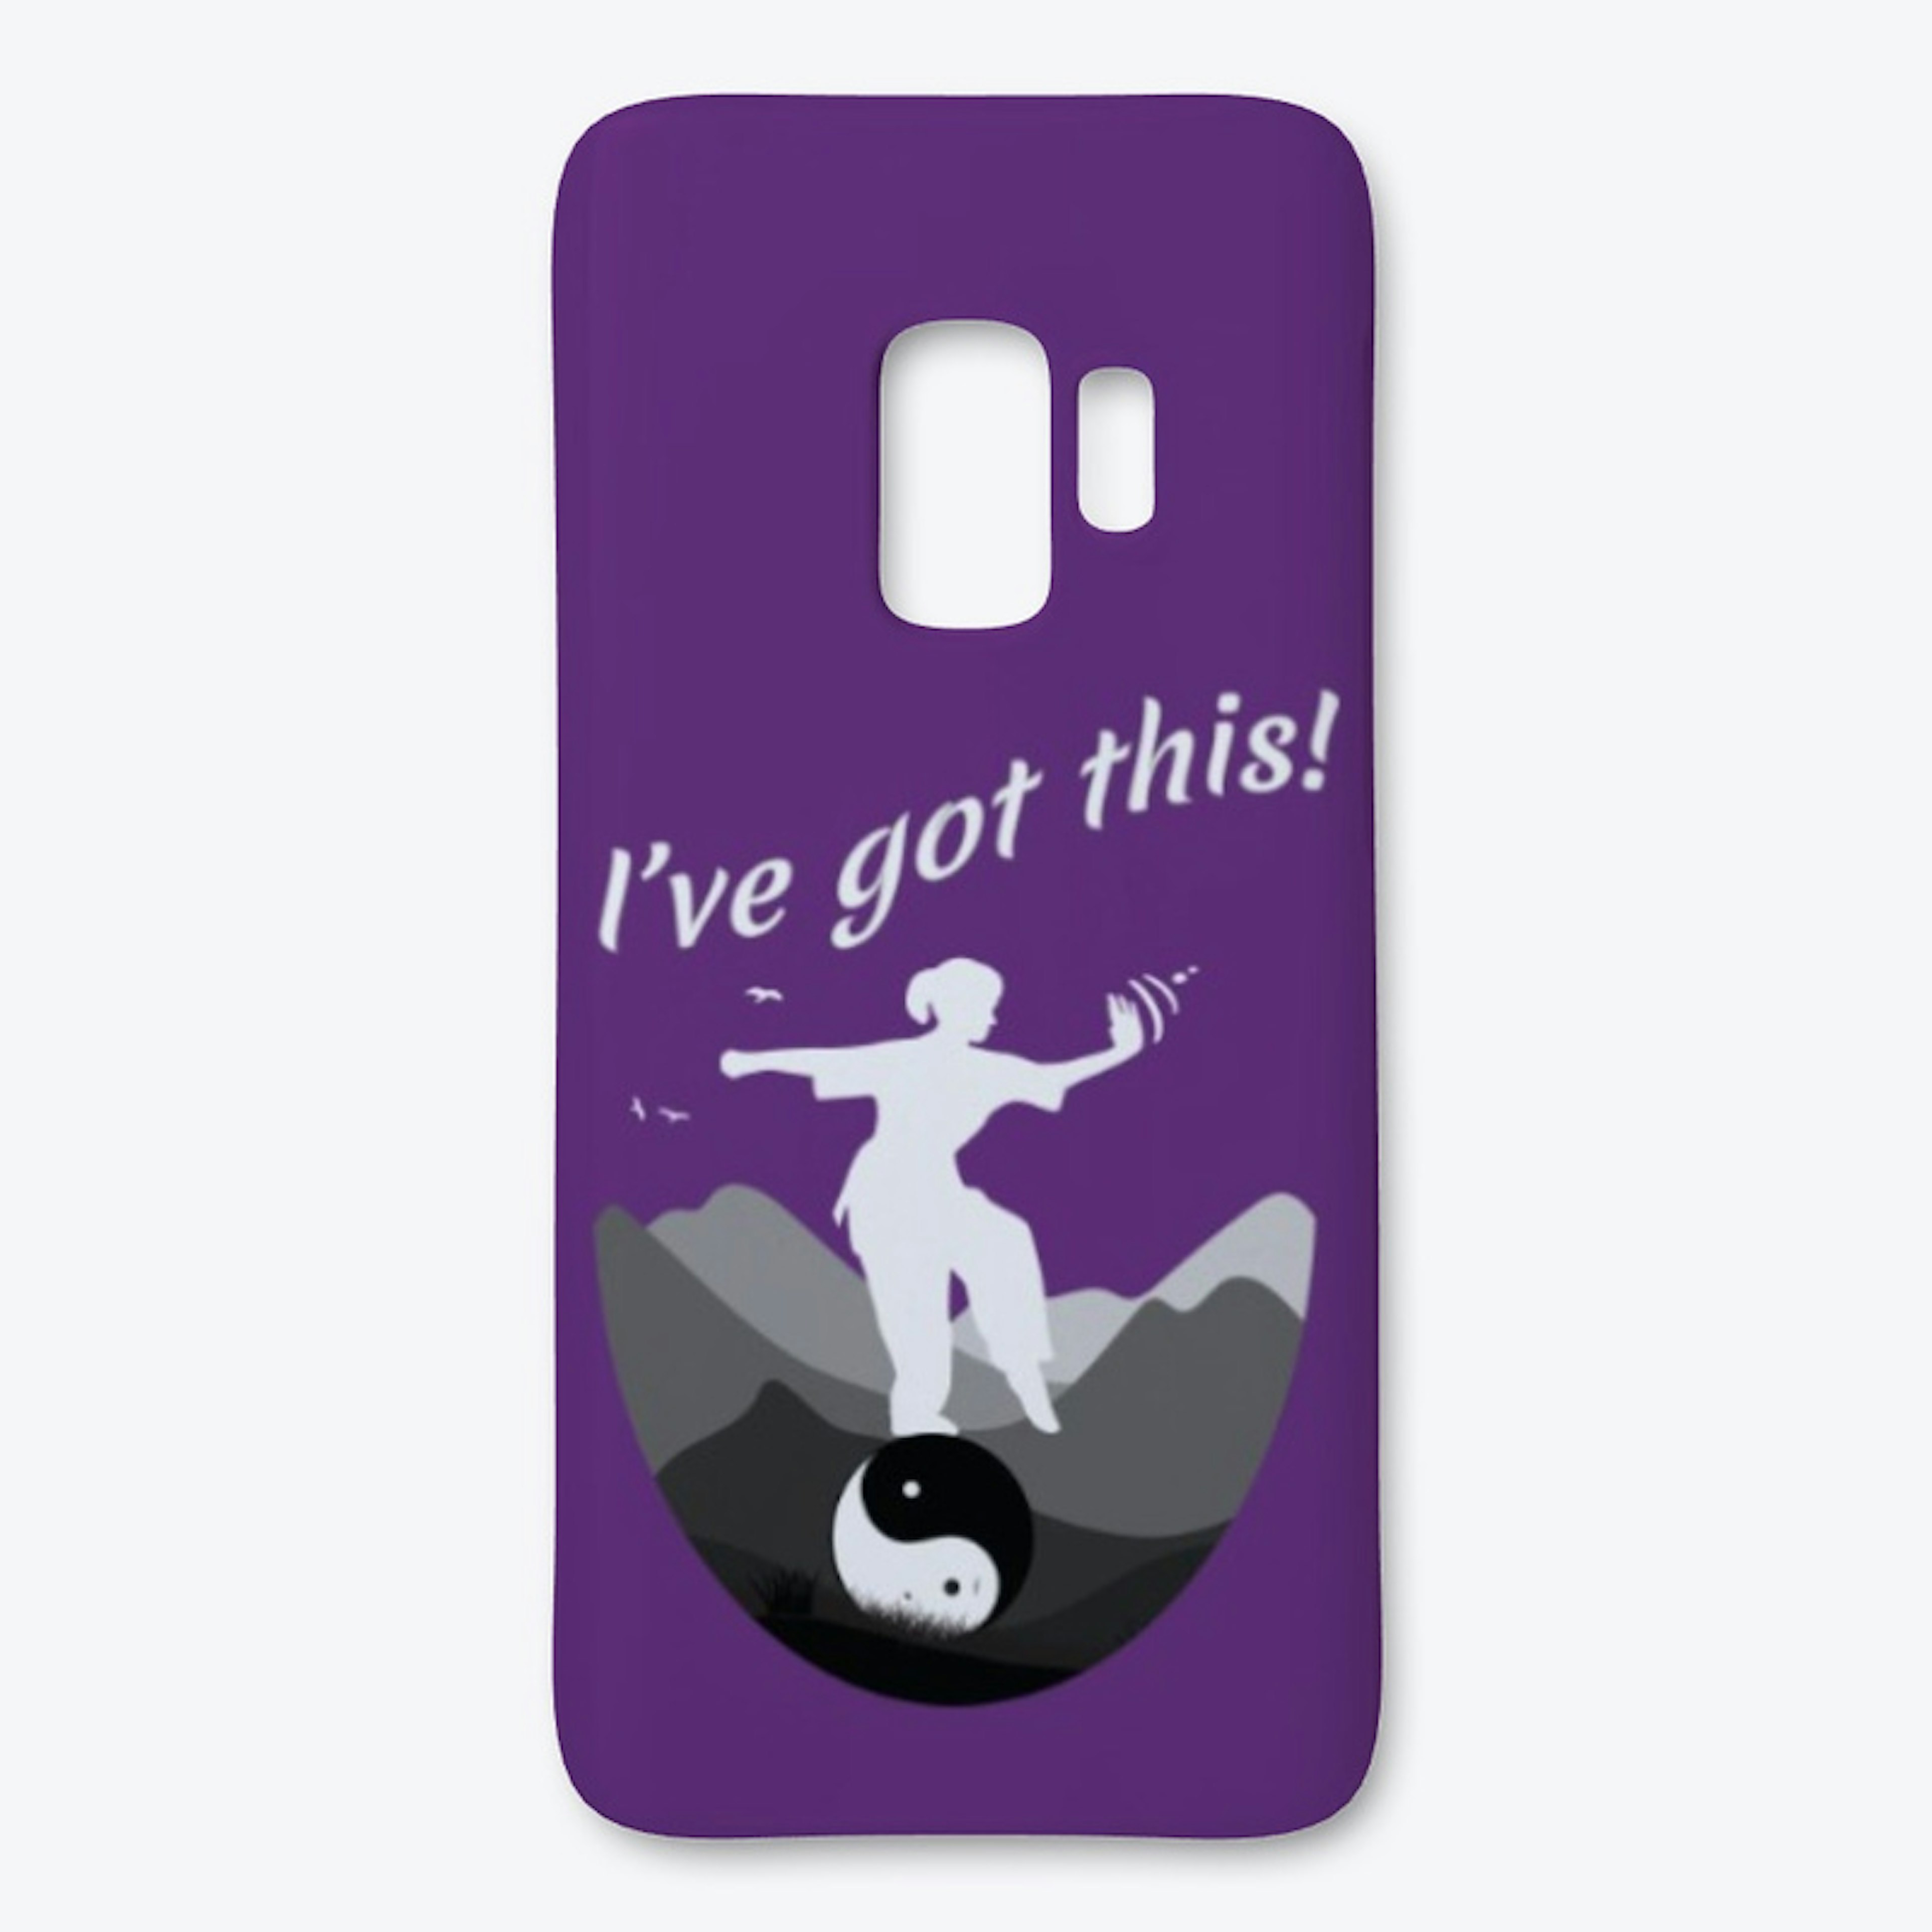 Thoughts Warrior Phone Cases